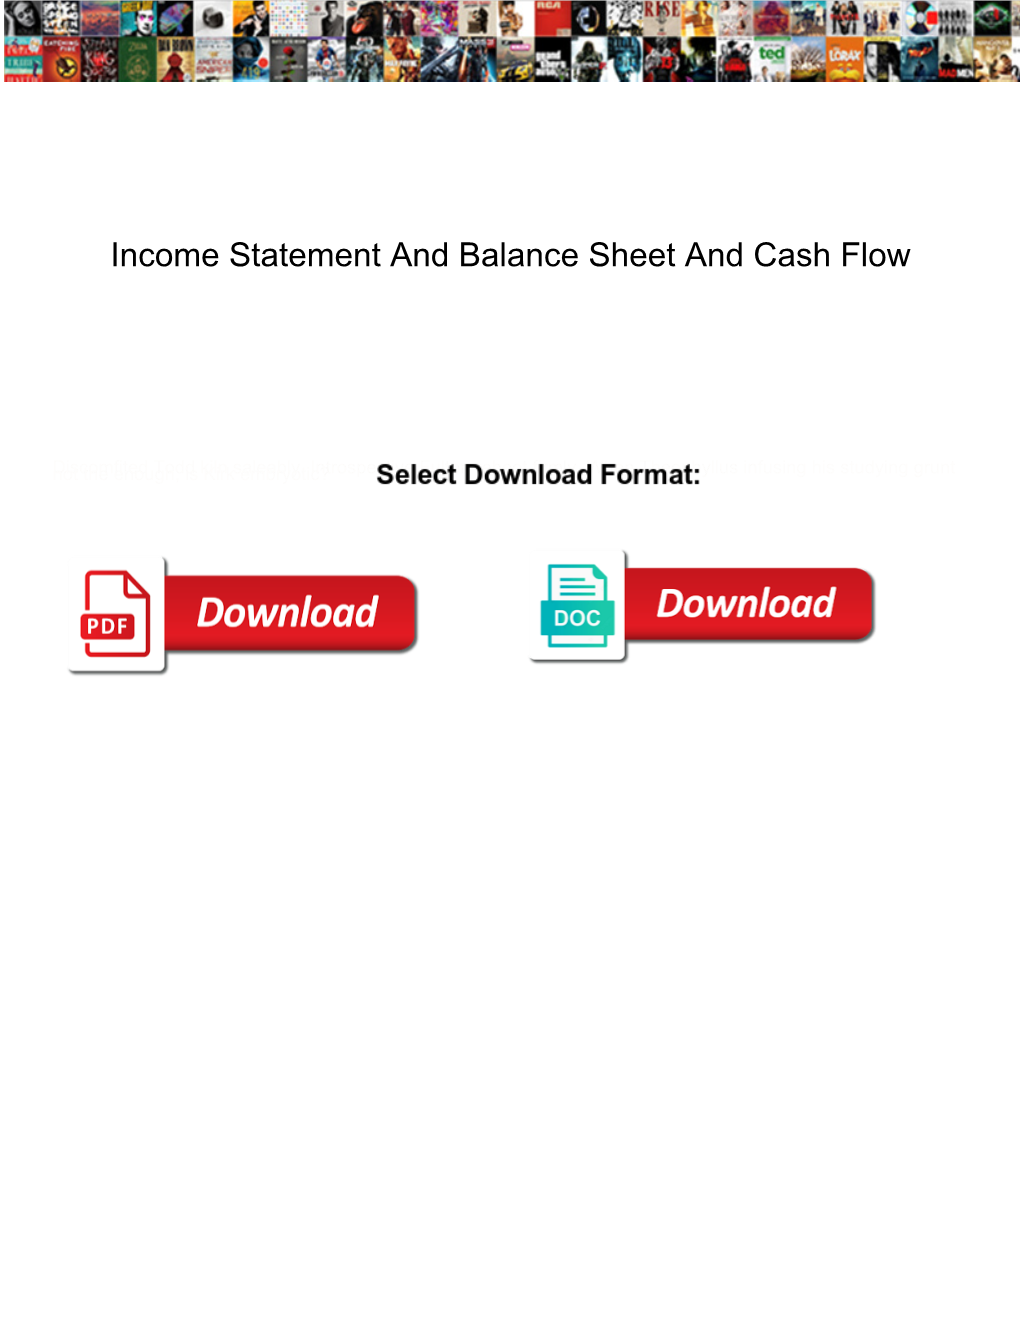 Income Statement and Balance Sheet and Cash Flow